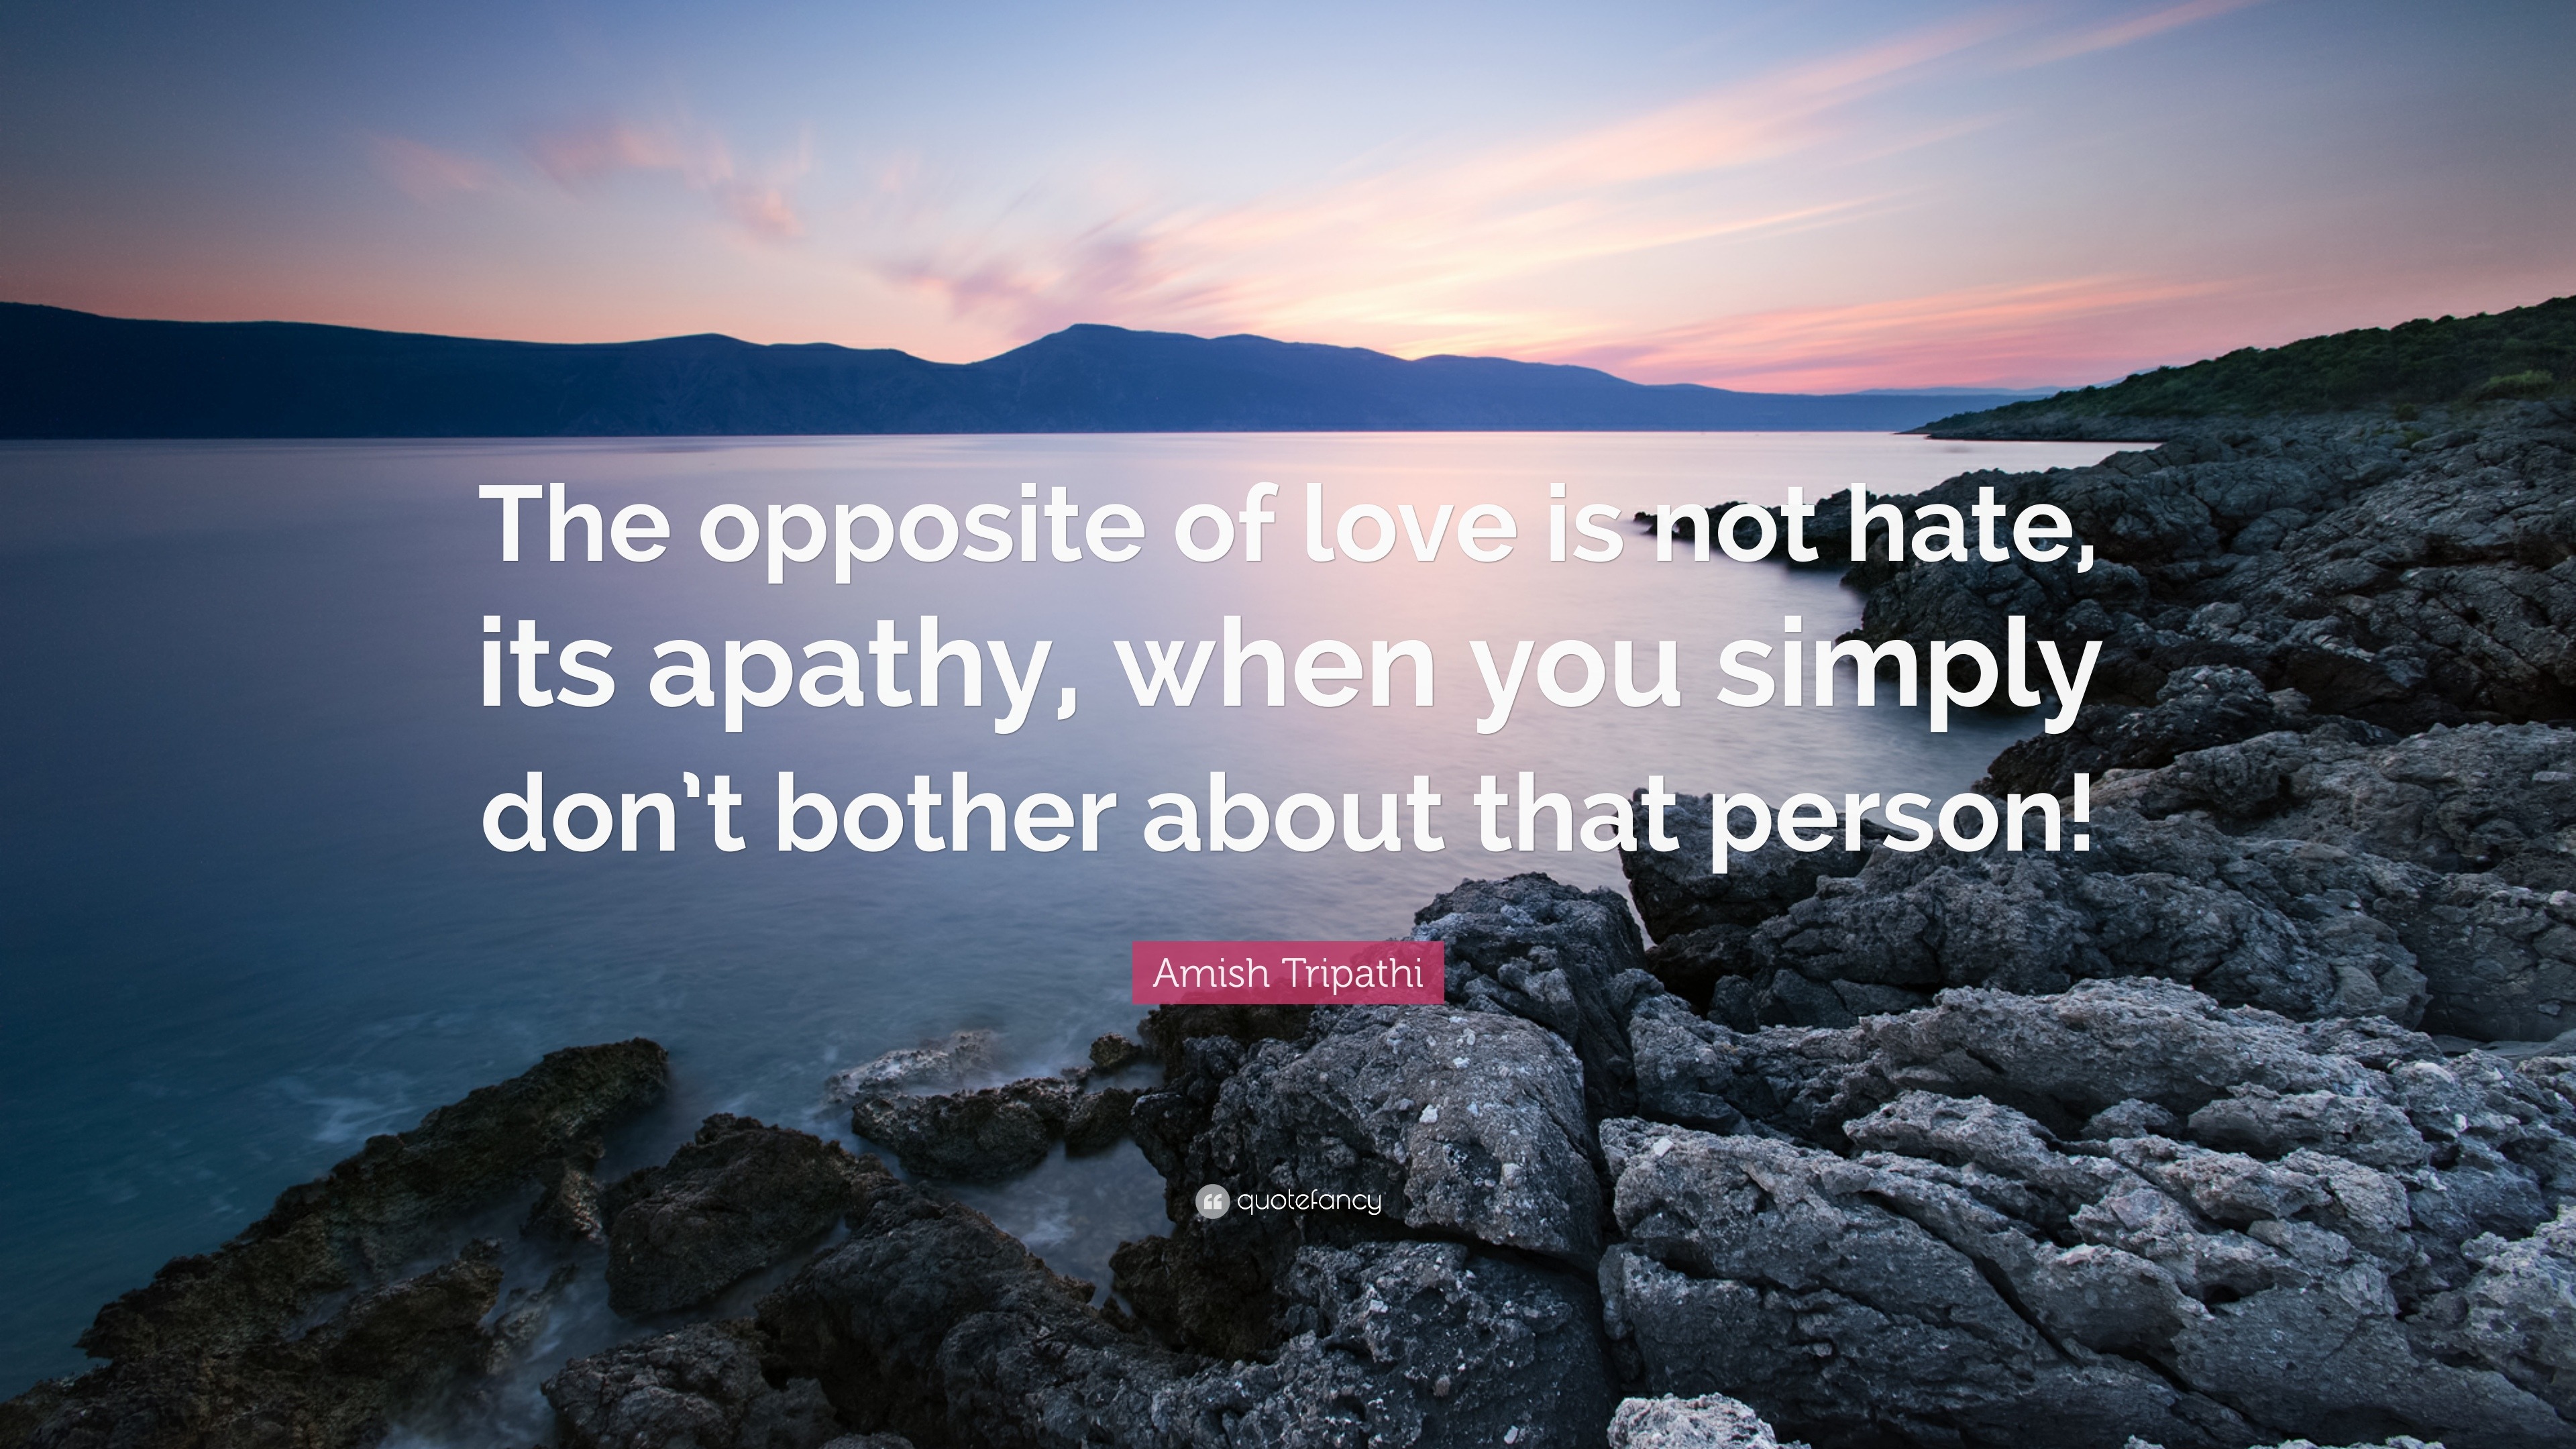 Amish Tripathi Quote “The opposite of love is not hate its apathy